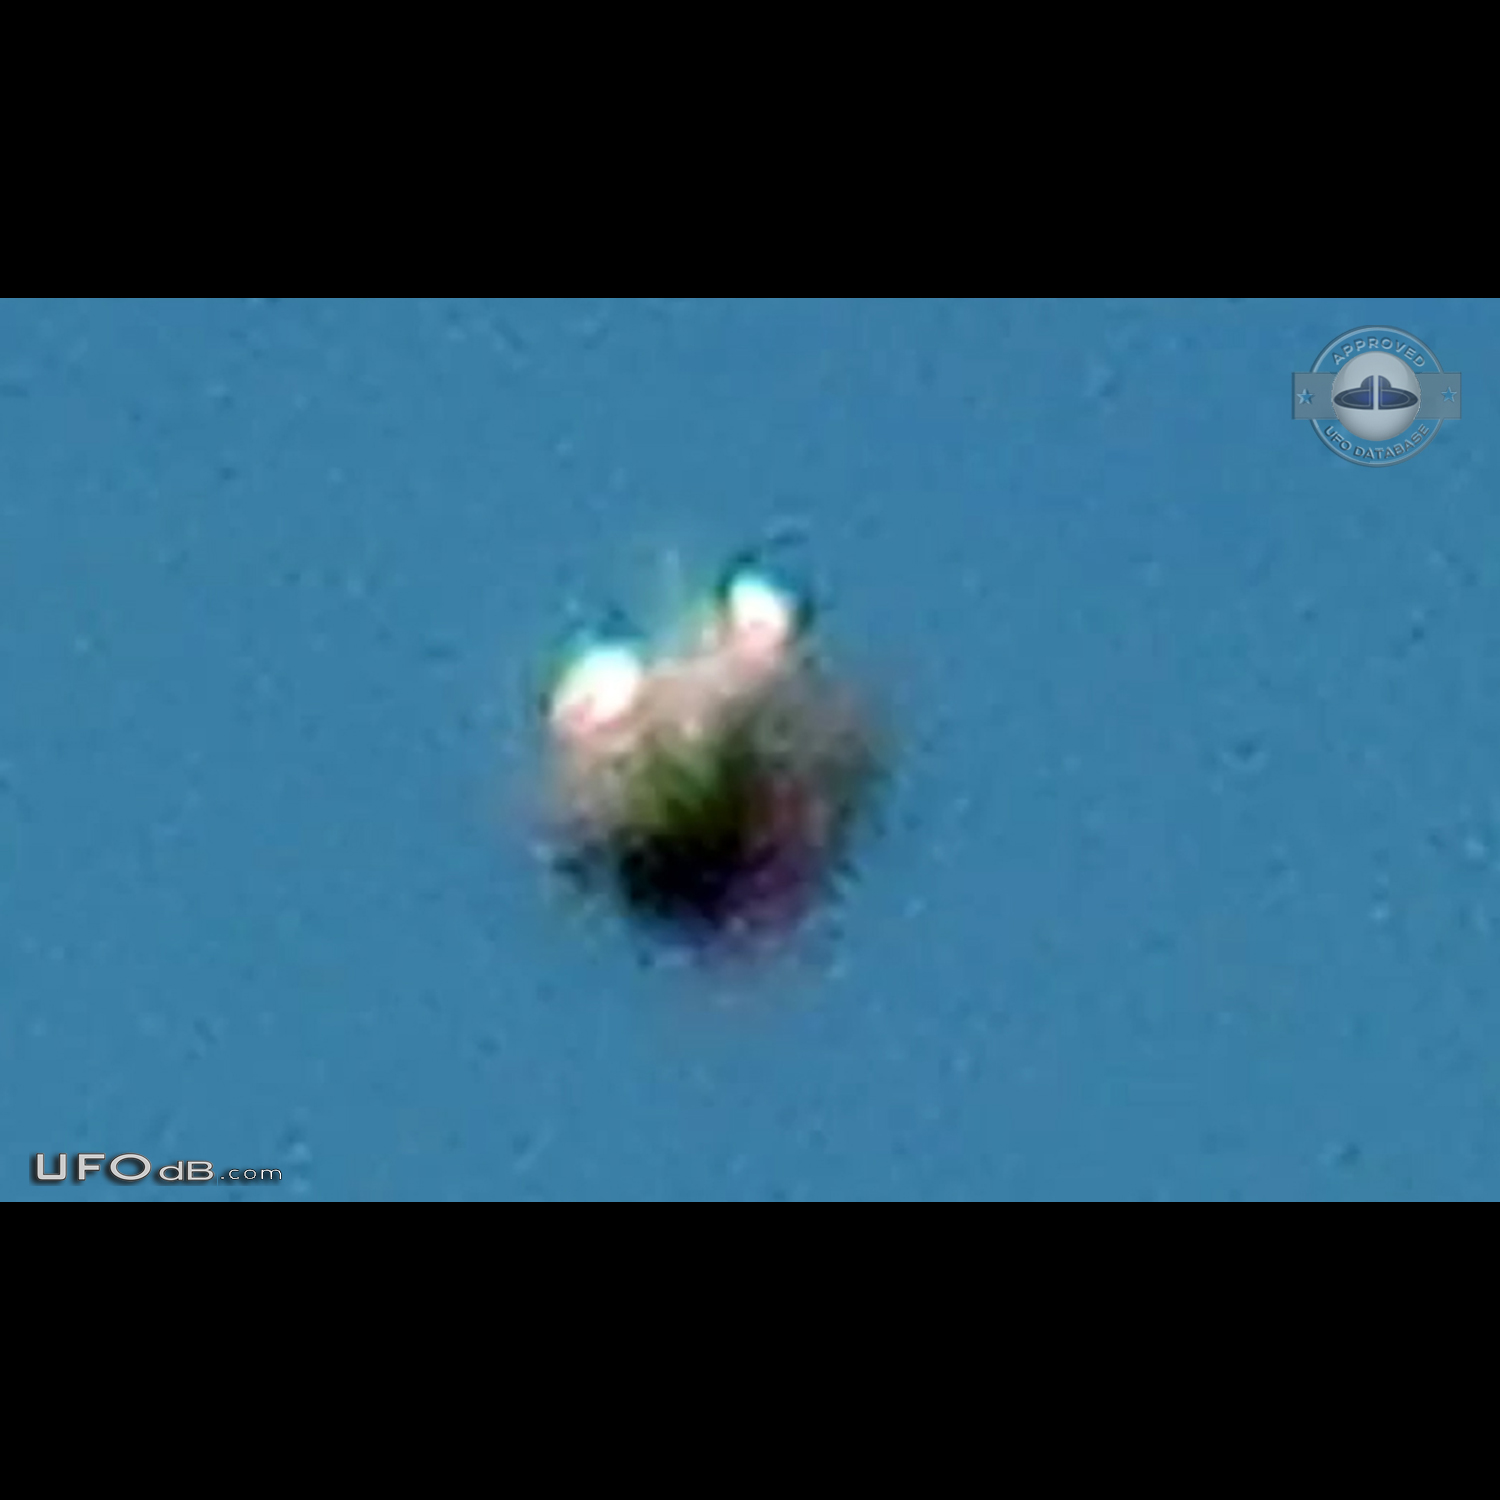 Jerky and strange UFO seen in Scarborough, Ontario canada 2015 UFO Picture #685-5